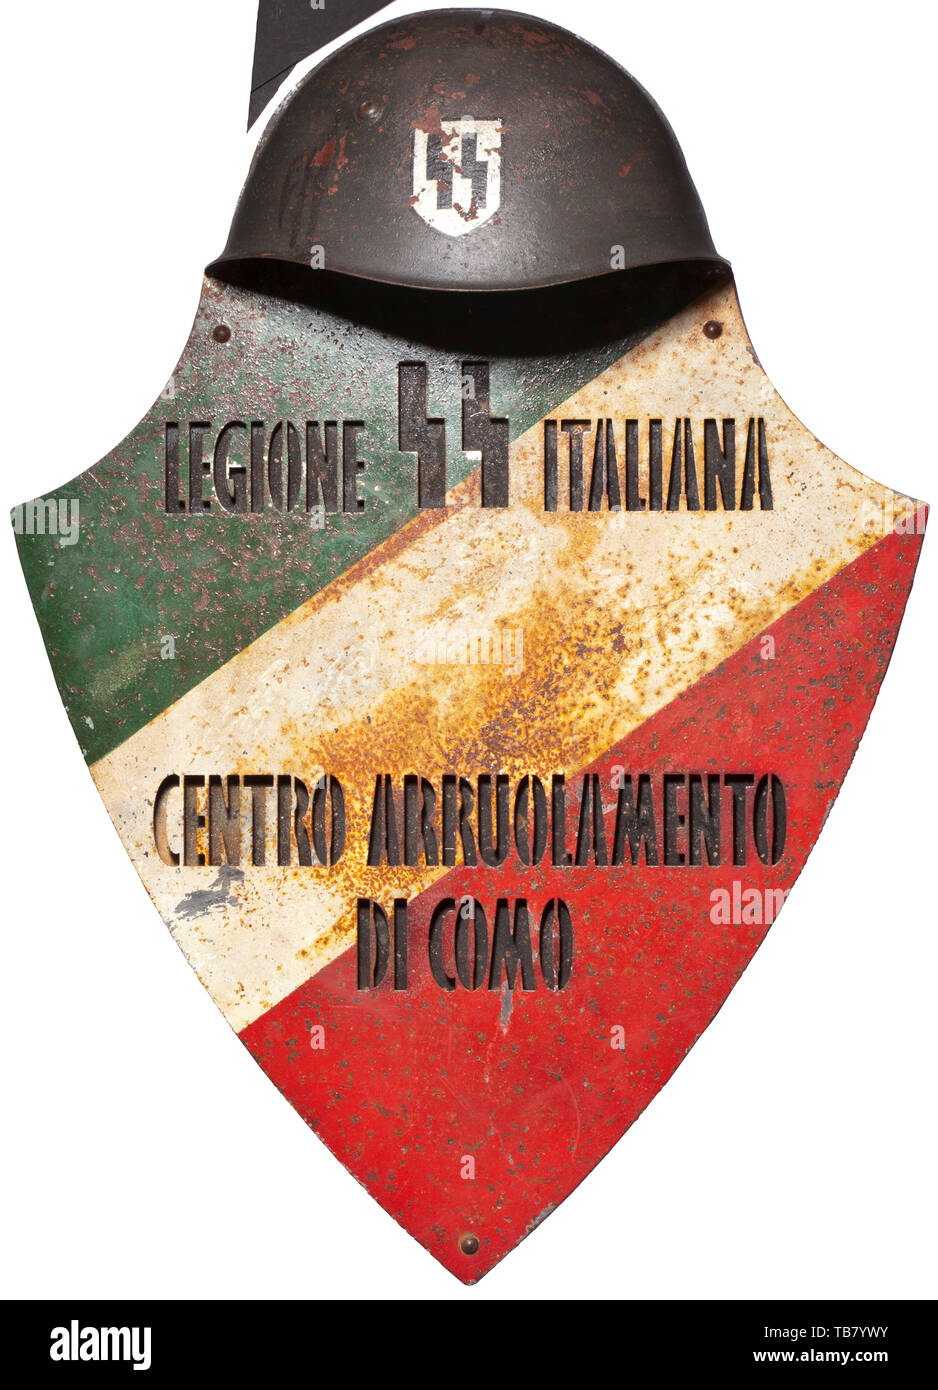 A barracks sign of the 29th Waffen Grenadier Division of the SS (1st Italian), Double-layered, riveted sheet iron, the inscriptions 'Legione SS Italiana' and 'Centro Arruolamento di Como' (Recruitment Centre Como) in openwork, the paintwork (rubbed) in the colours of the Italian tricolour. The upper edge in the shape of a steel helmet with a painted SS emblem, behind which a pin hole. Signs of age and use. Dimensions circa 69 x 49 cm. 20th century, 1930s, 1940s, Waffen-SS, armed division of the SS, armed service, armed services, NS, National Socialism, Nazism, Third Reich, , Editorial-Use-Only Stock Photo